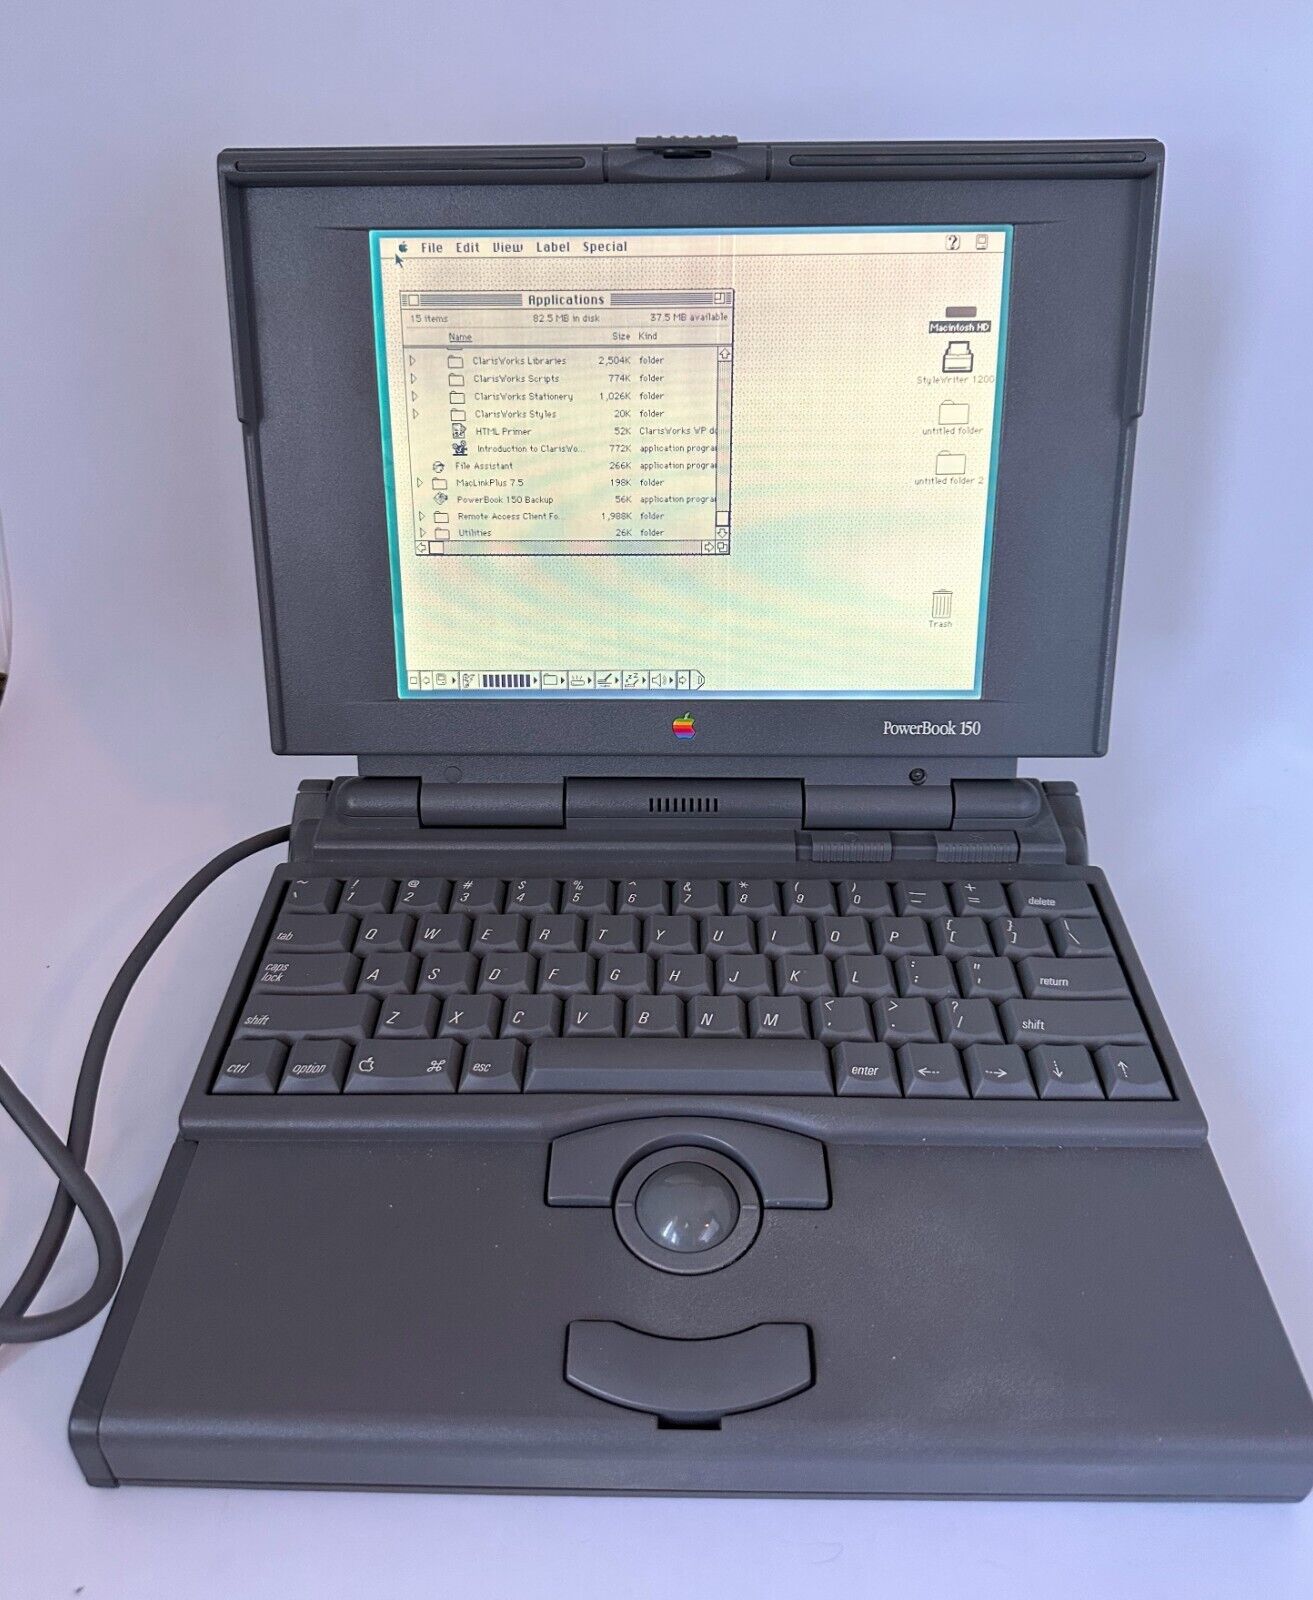 Vintage Apple PowerBook 150 M2740, with Power Cord and Manual, WORKS, EX COND